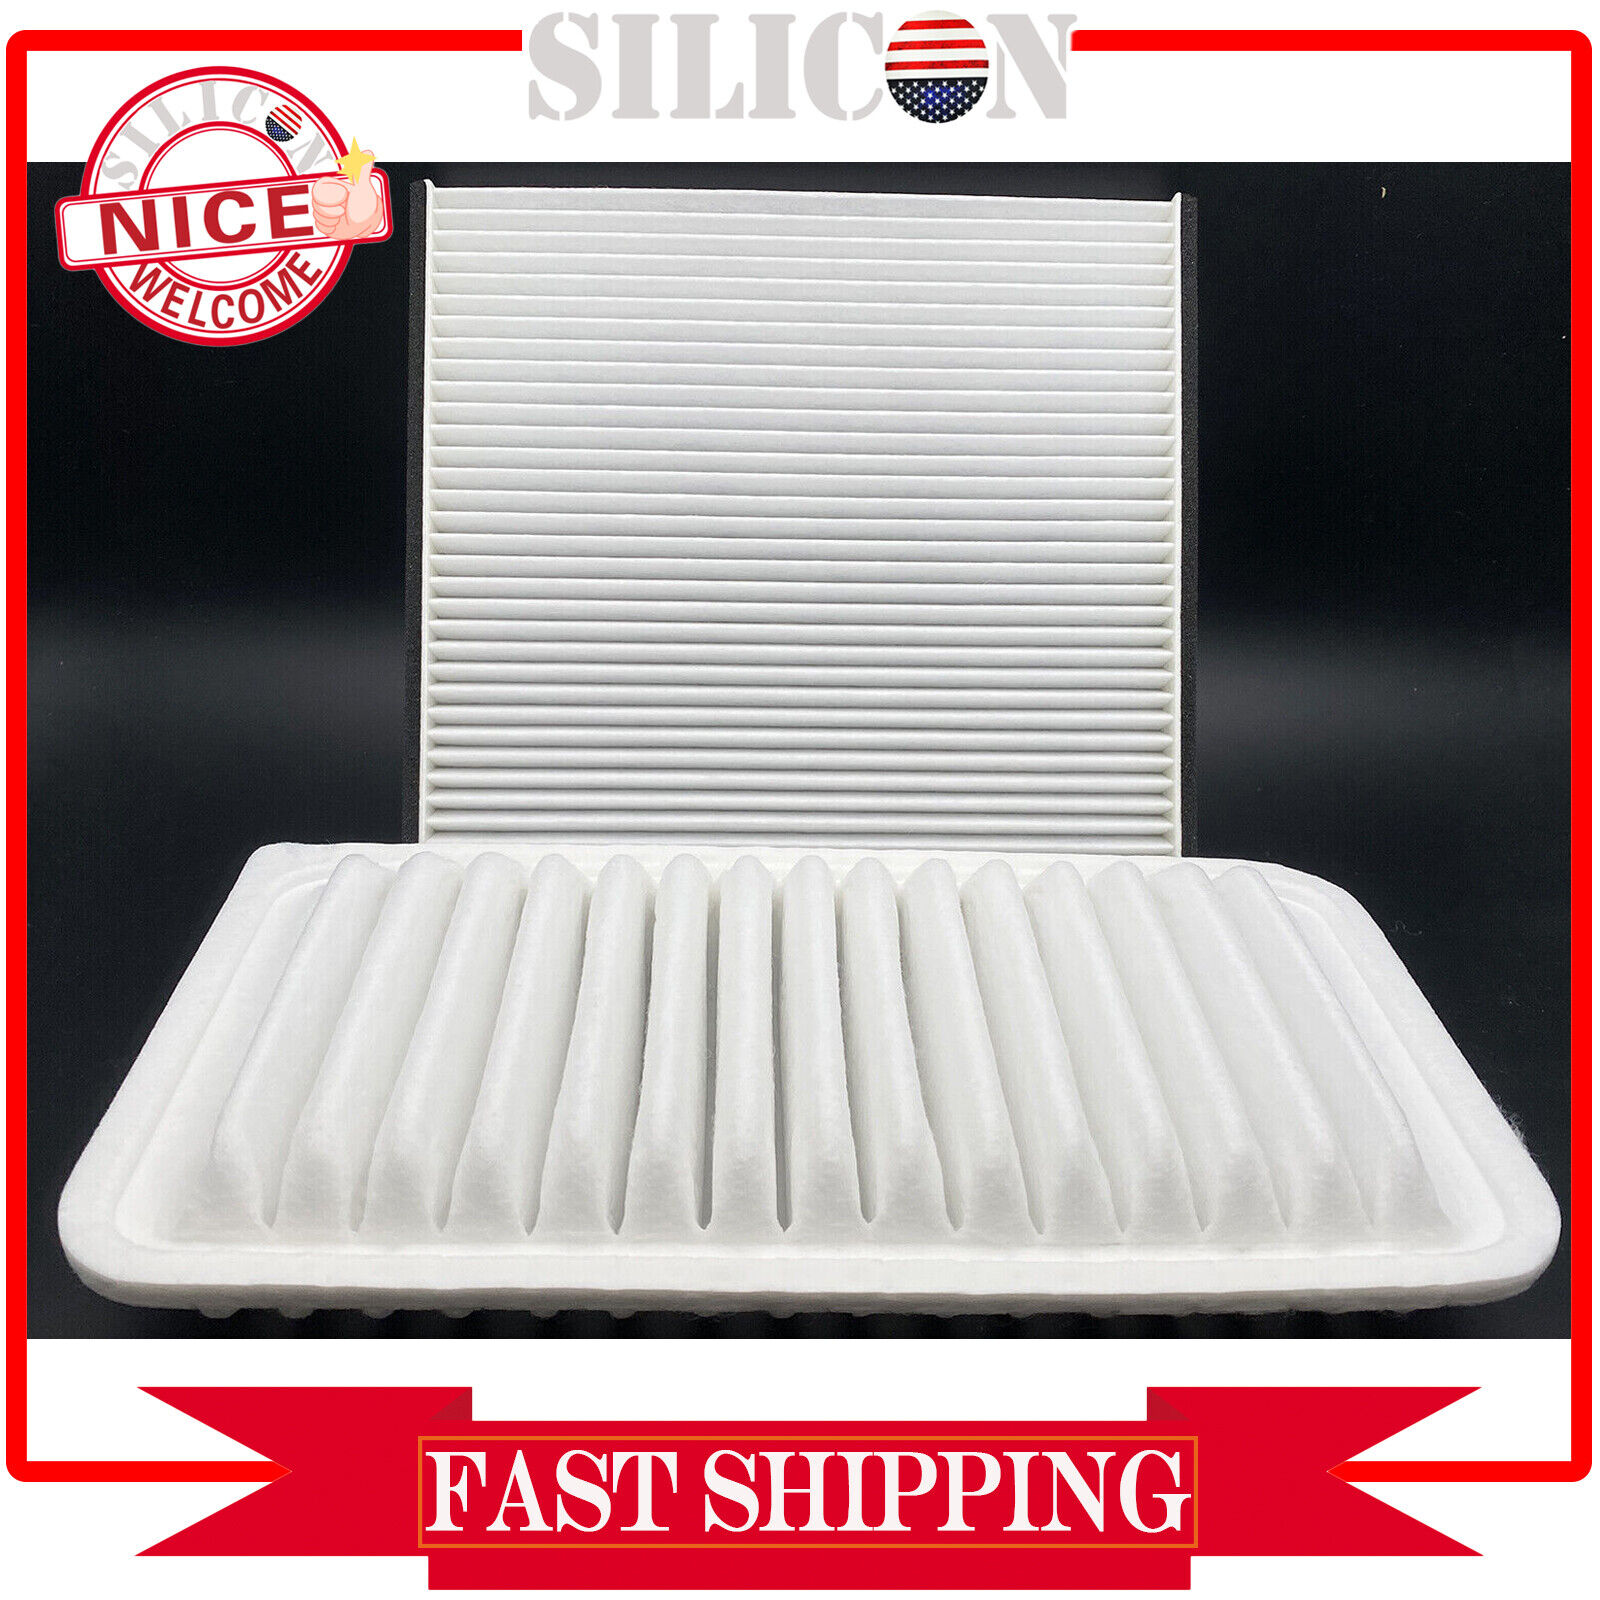 Cabin Air and Air filter Combo Set Fits For 2003-2008 Toyota Corolla 1.8L Engine